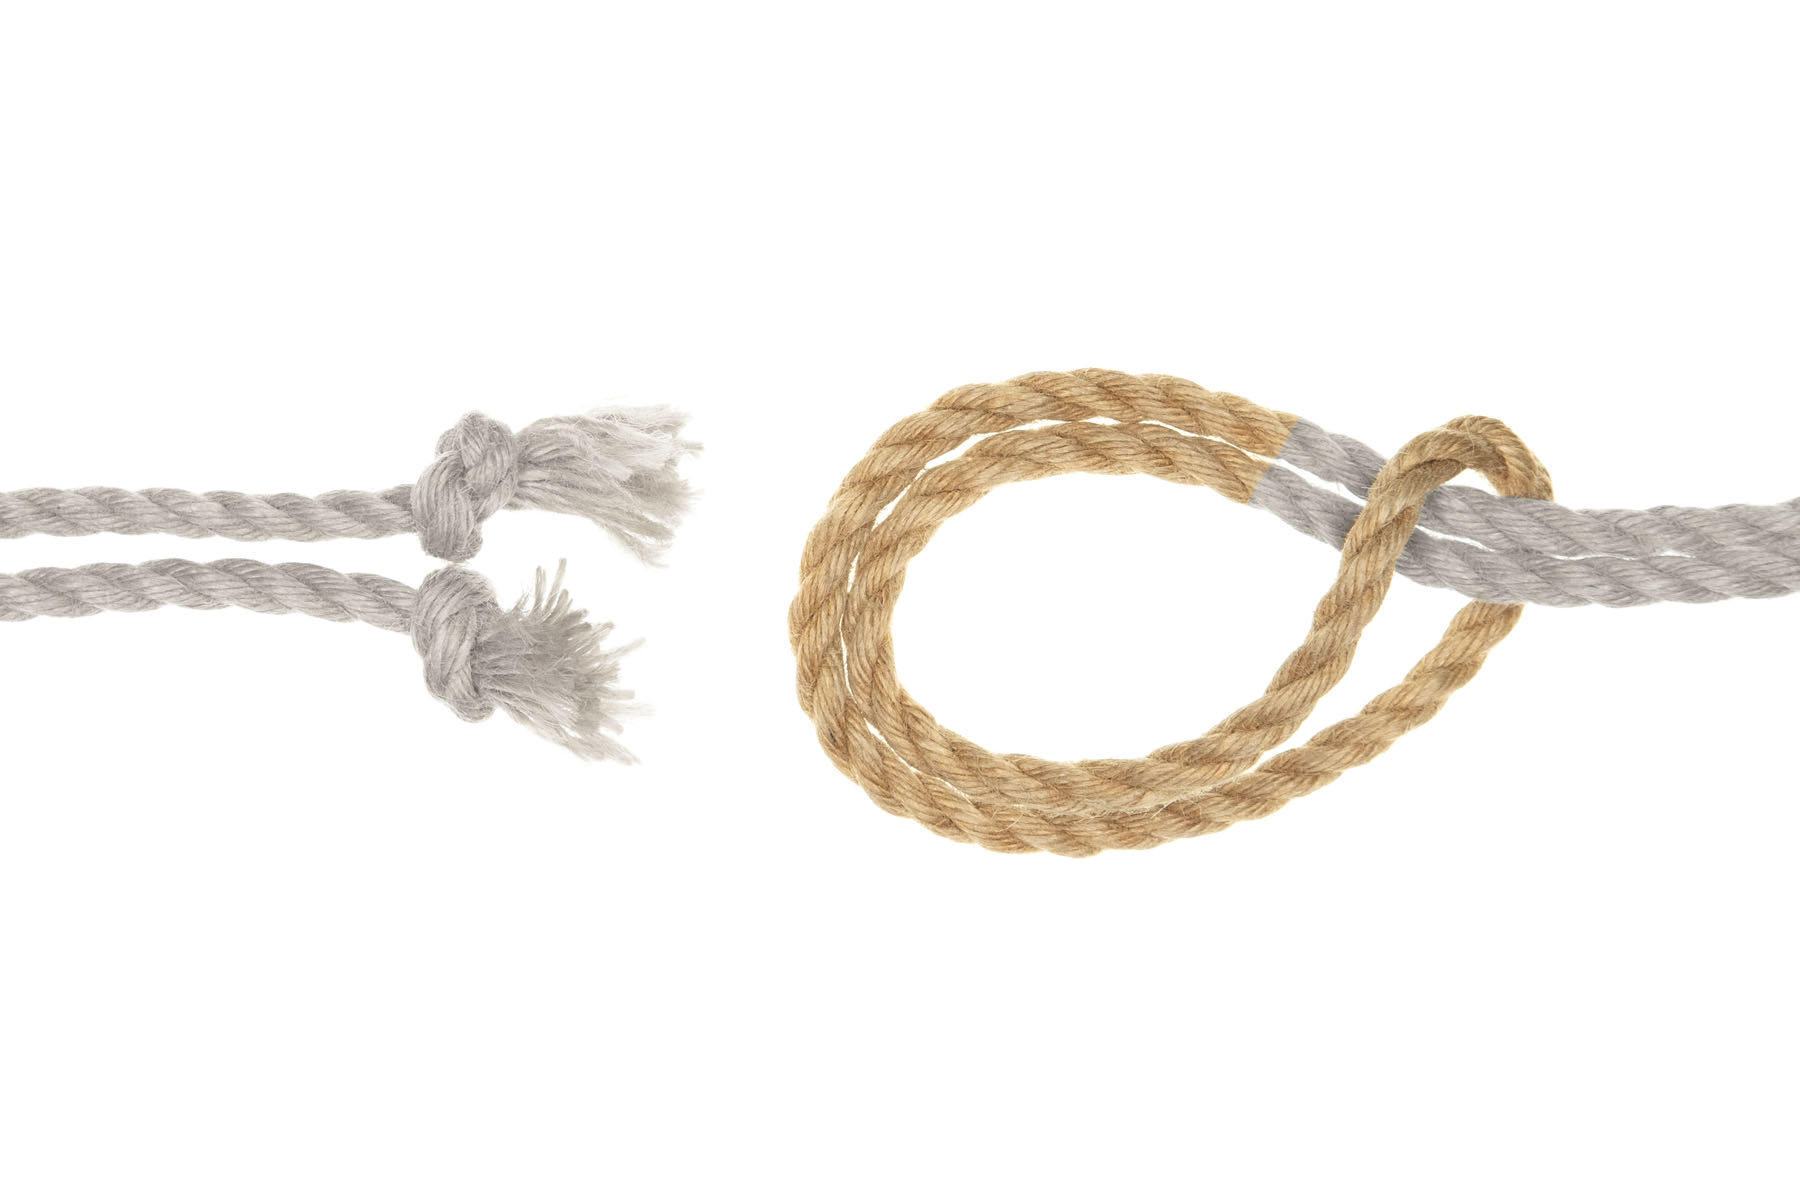 The bight of the right-hand rope has bend folded back on itself to make a lark’s head.